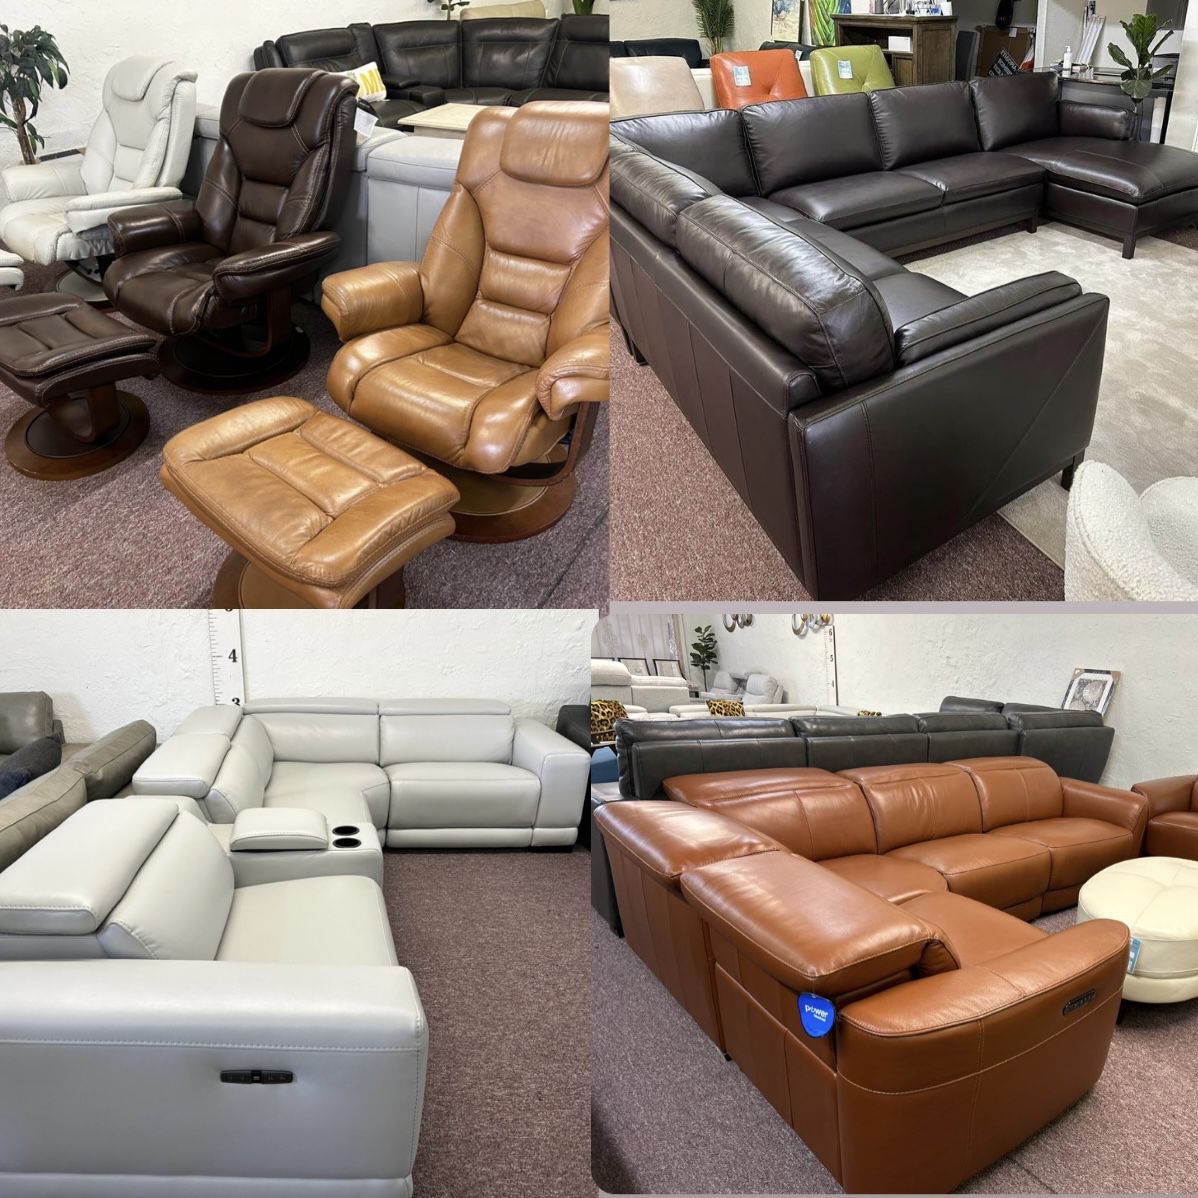 DISCOUNTS ON 100% REAL LEATHER SECTIONALS AND SOFAS